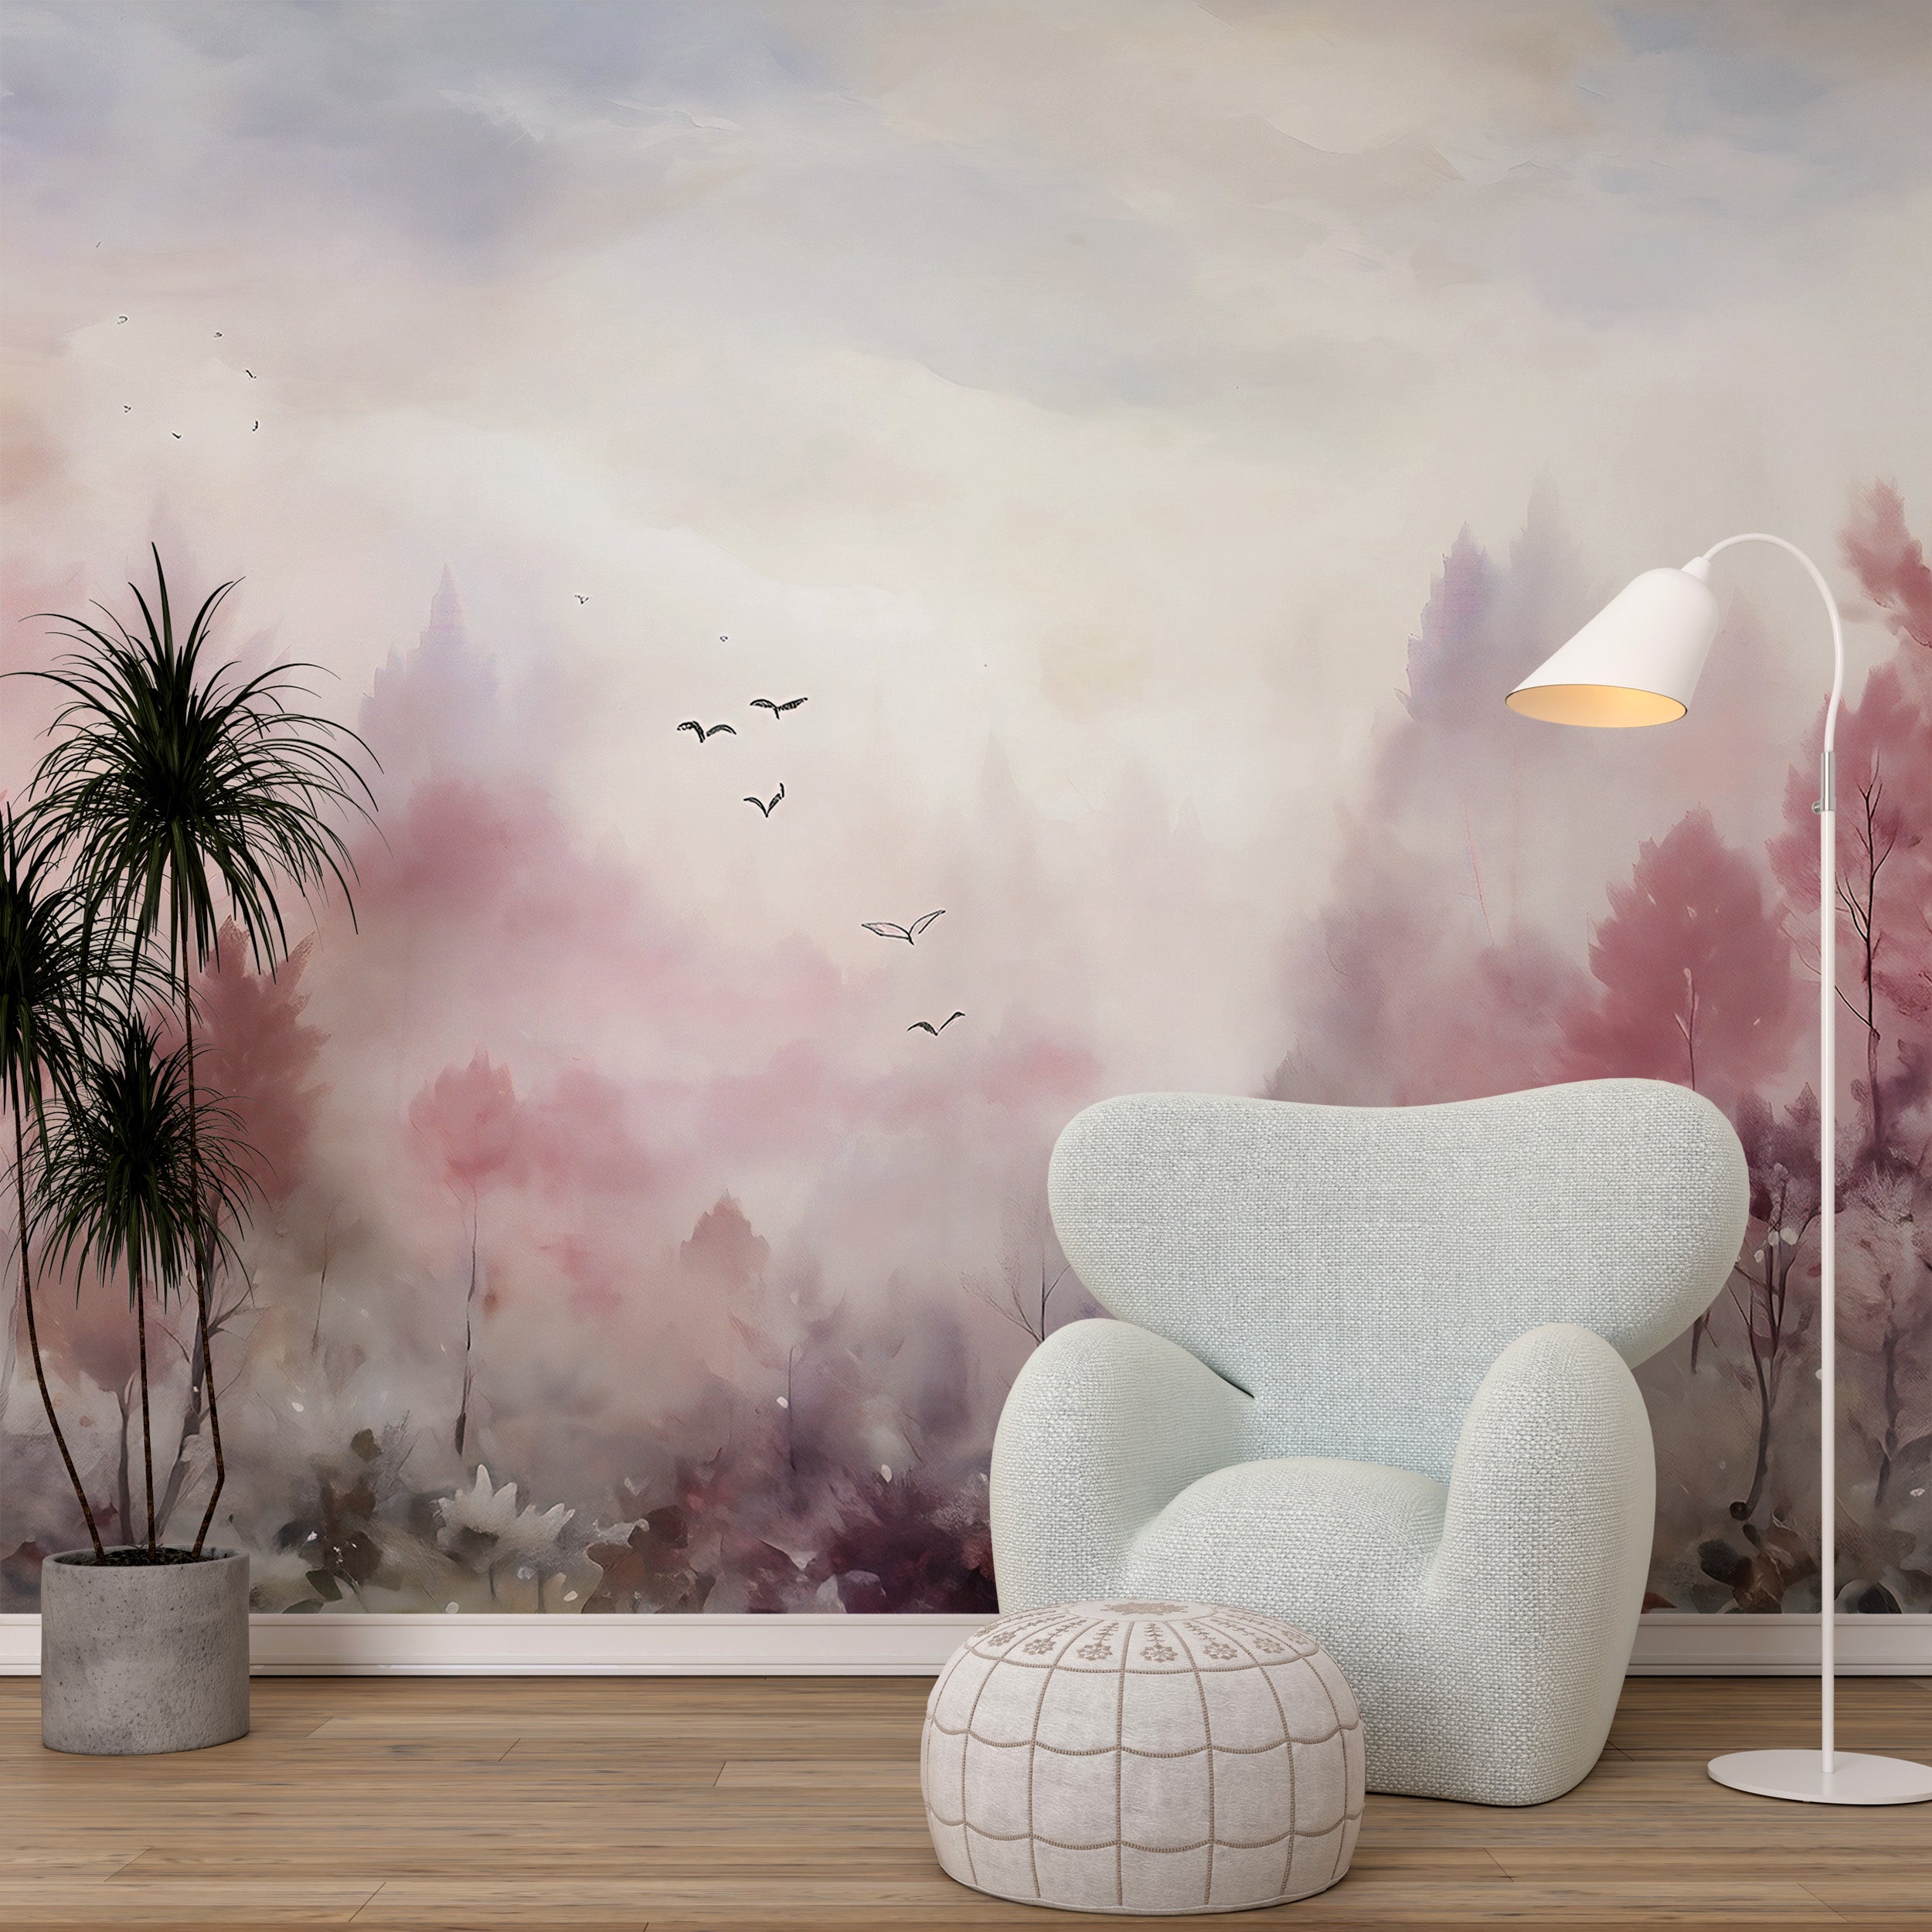 Watercolor Forest Mural Transforming Room Ambiance